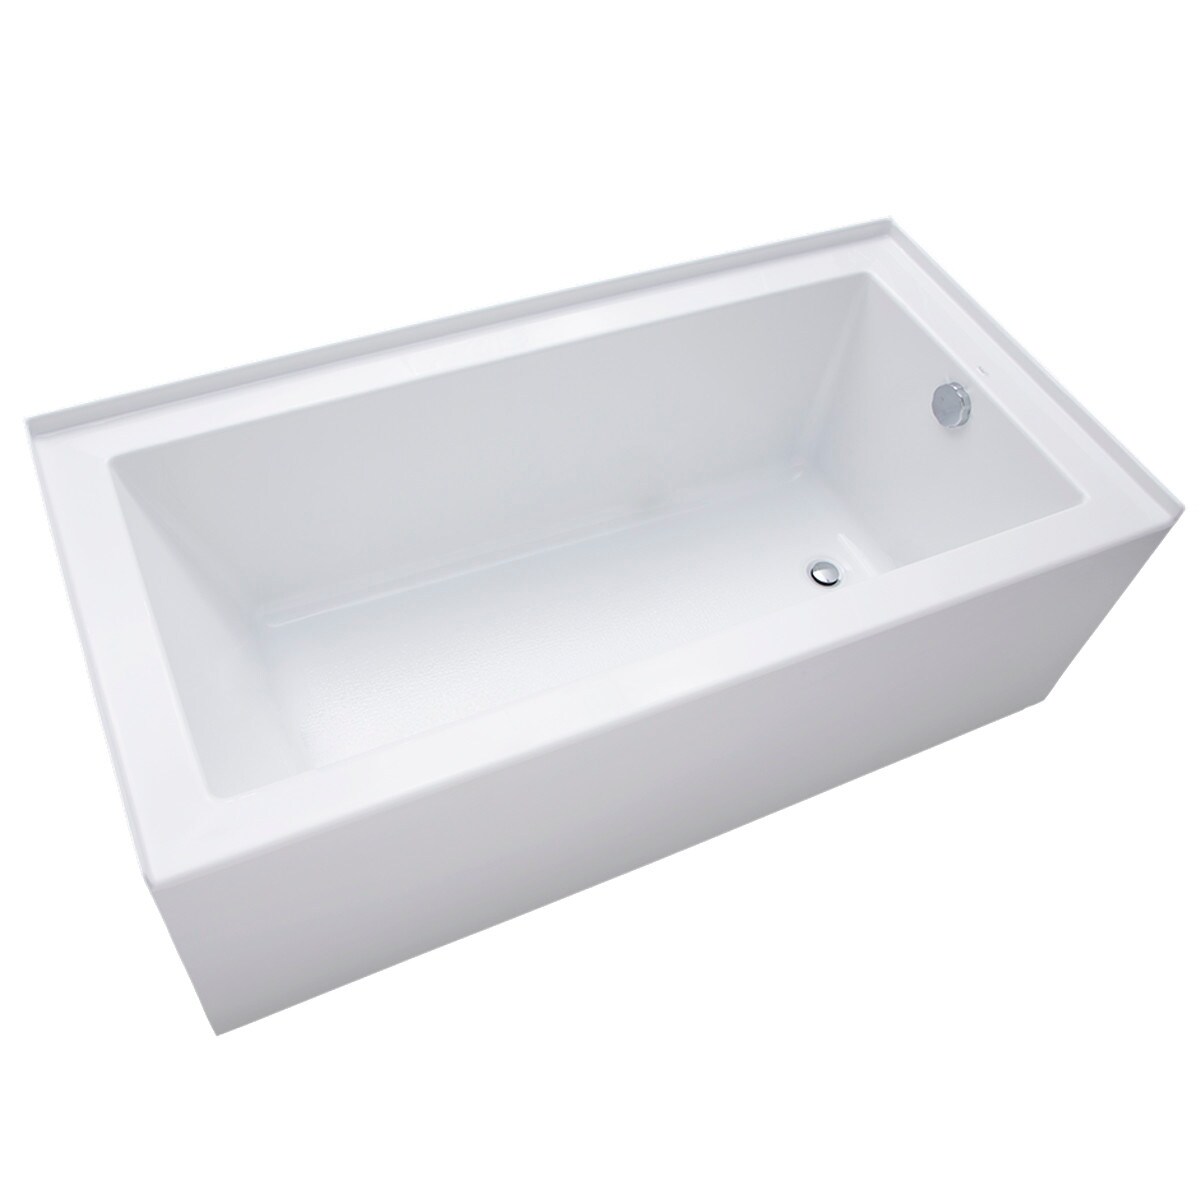 Bathtubs Find Great Home Improvement Deals Shopping At